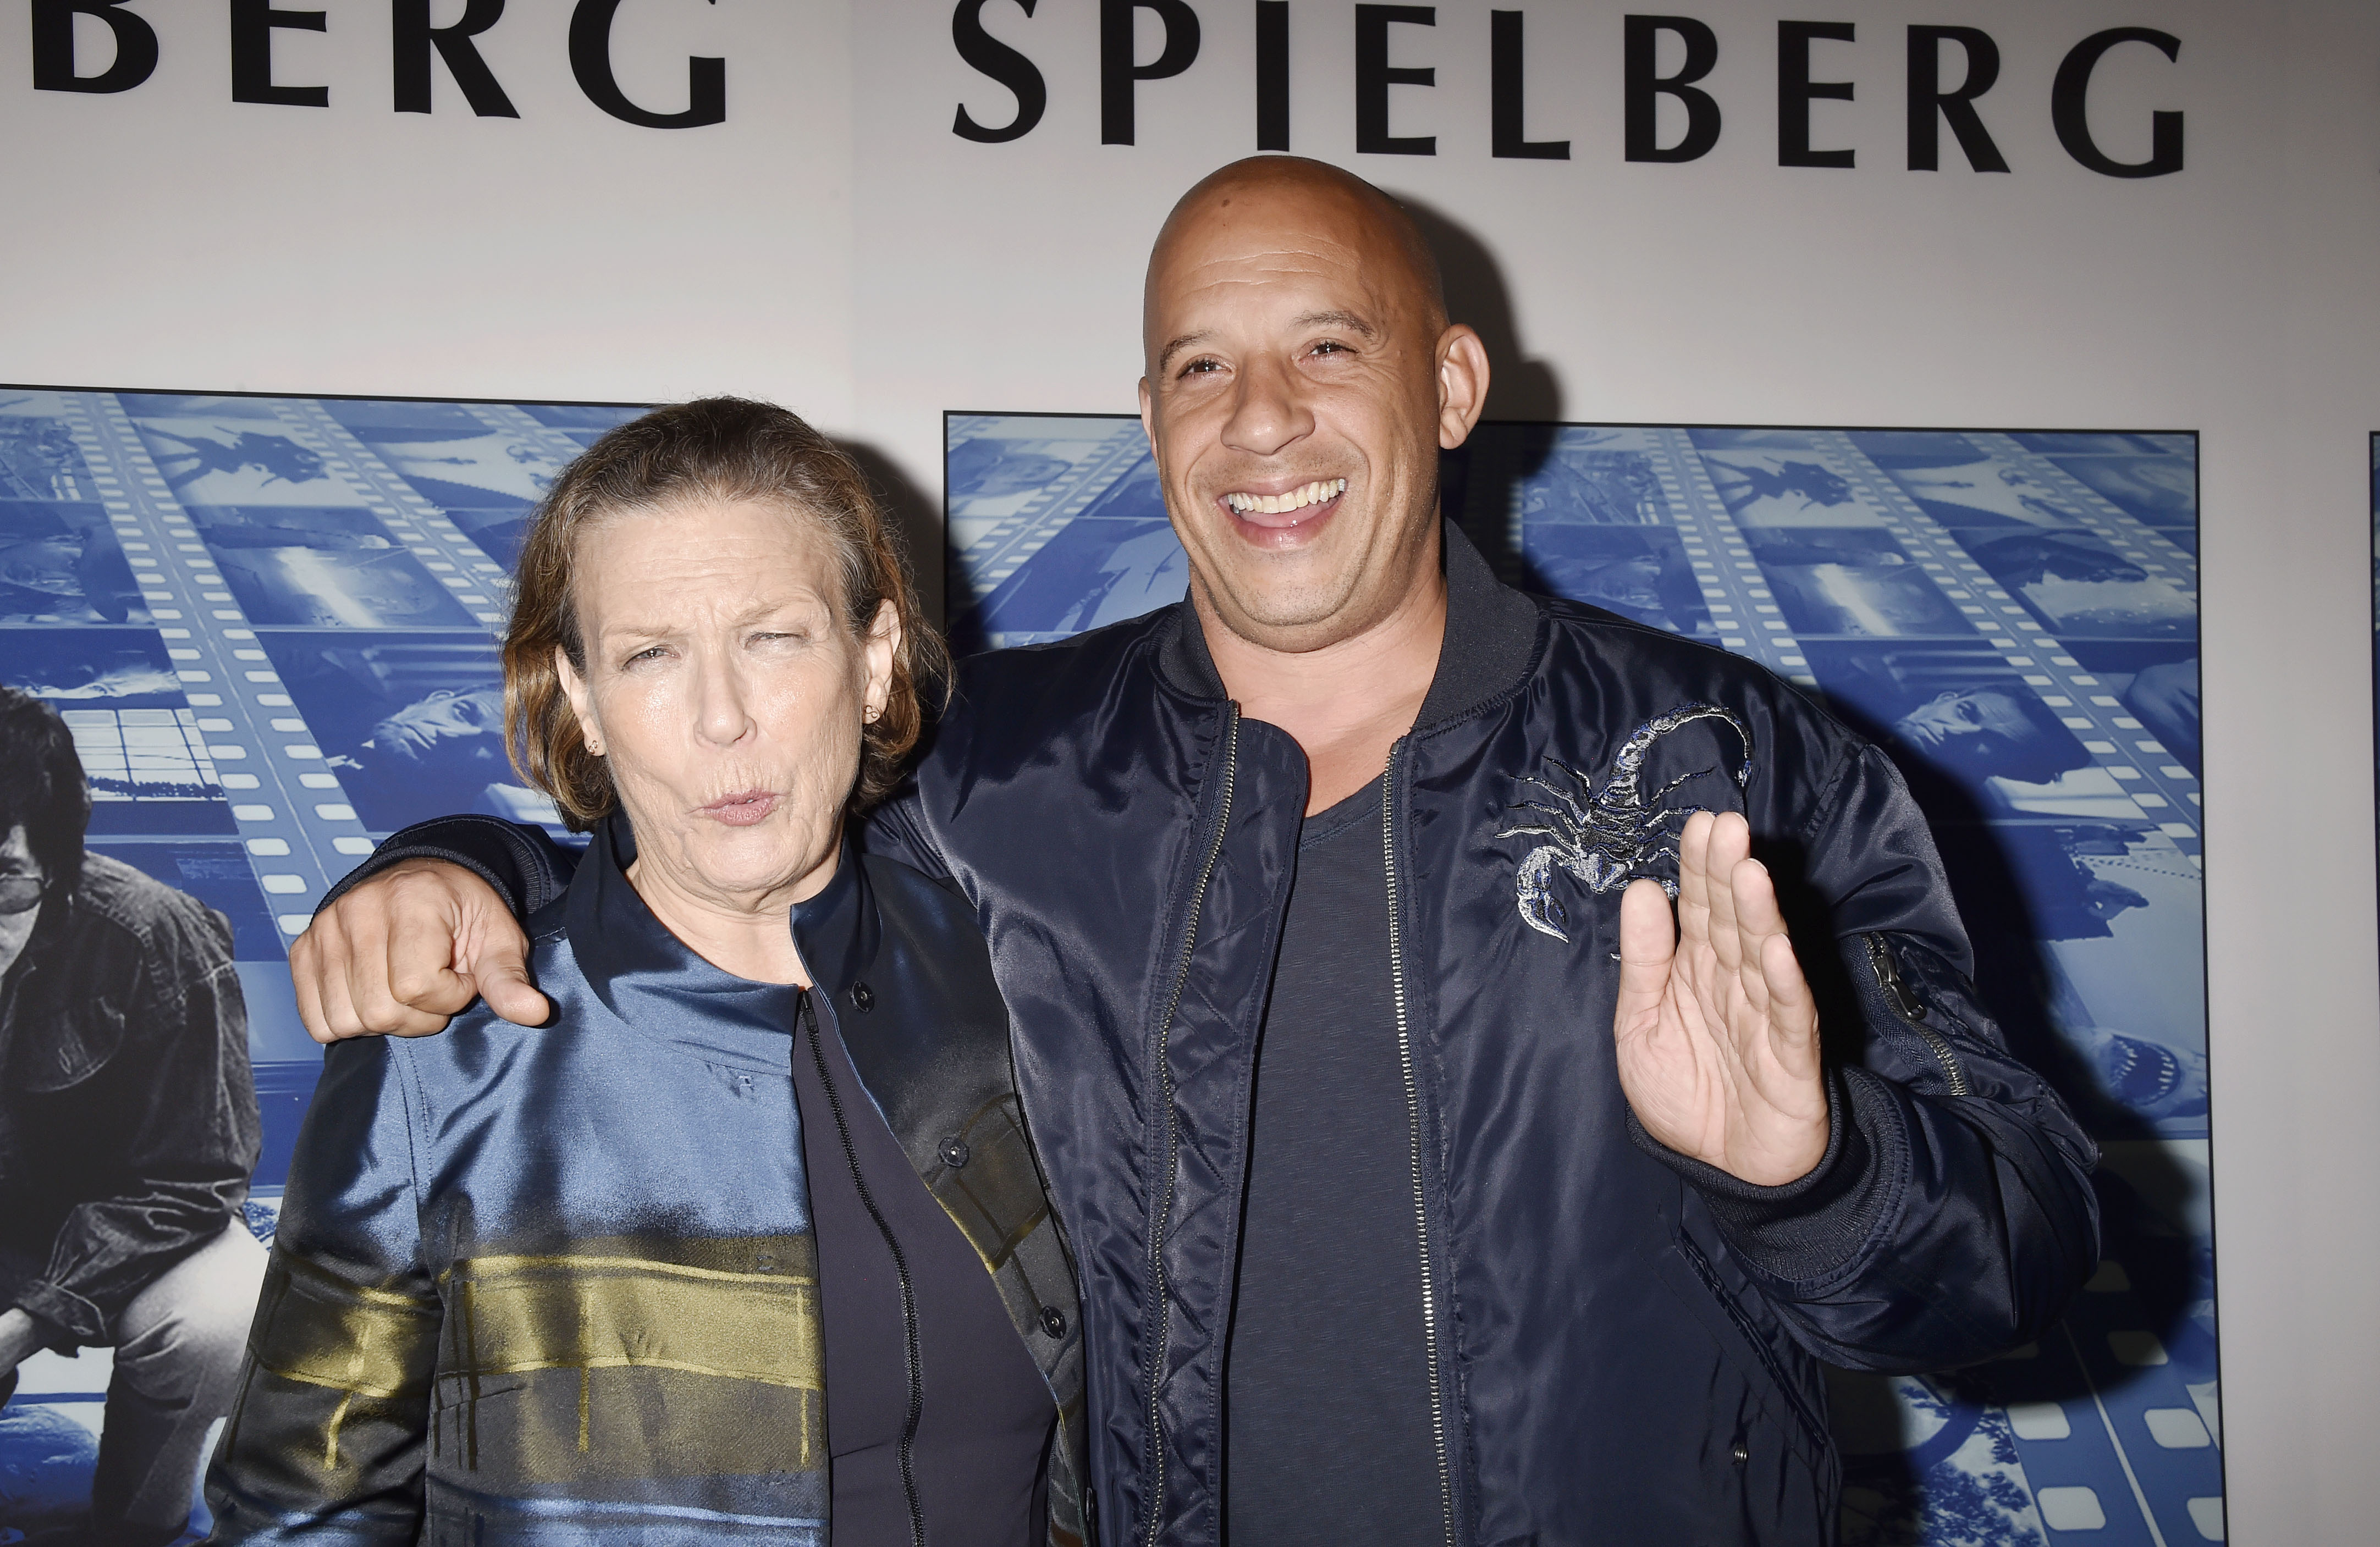 Vin Diesel and his mother Delora Vincent at the premiere of HBO's 'Spielberg' in 2017 in Hollywood, California. | Source: Getty Images